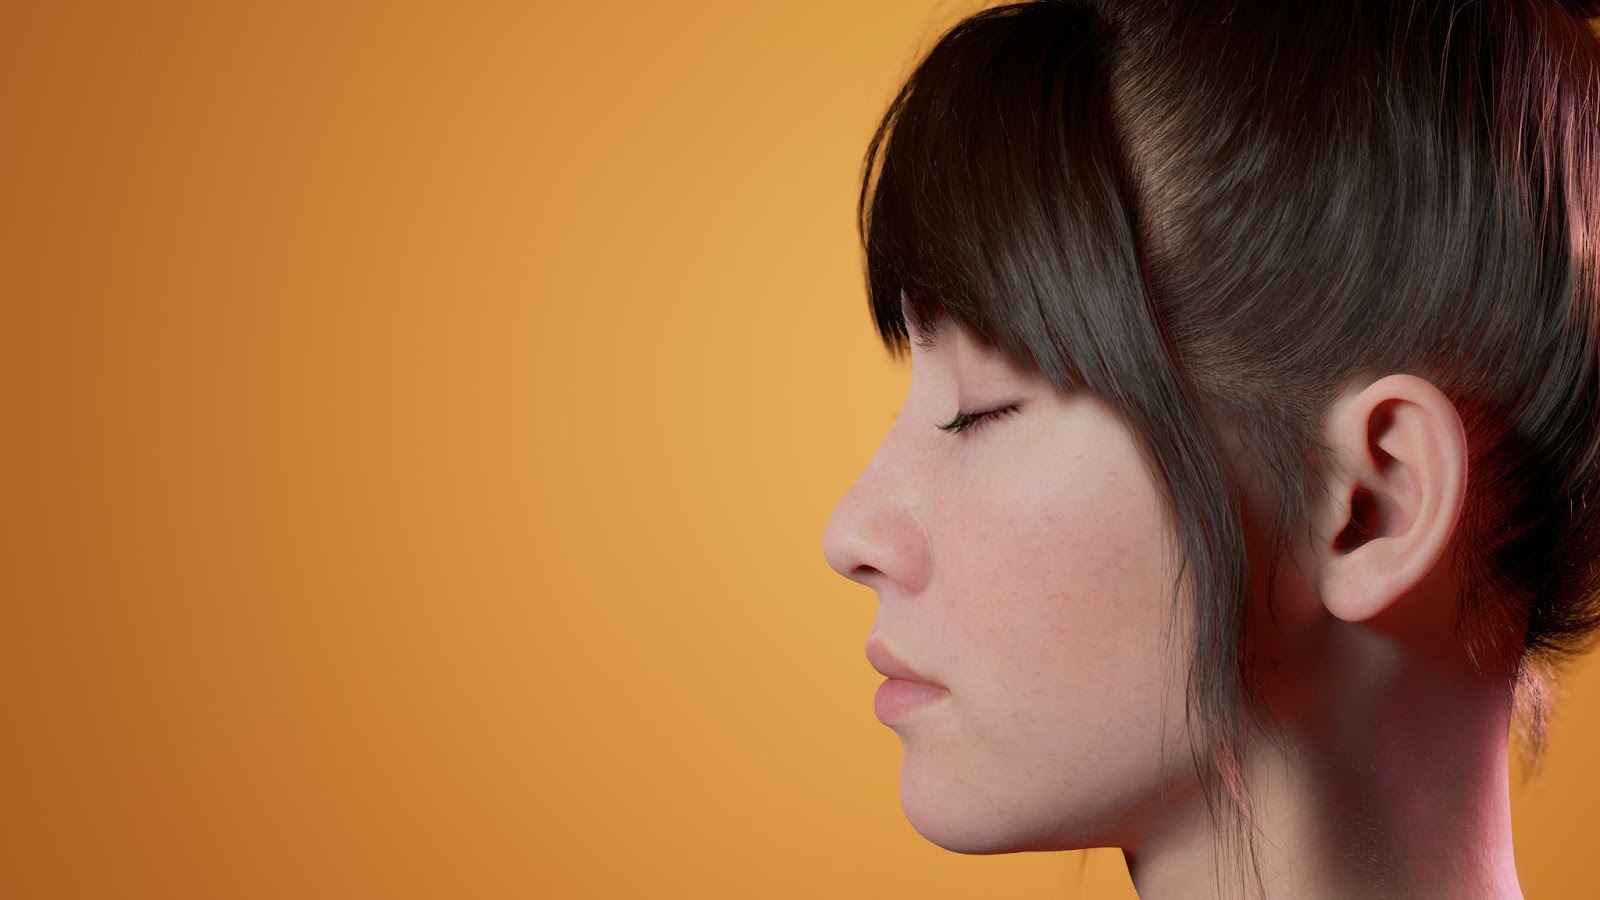 CGI created image of a woman closing her eyes